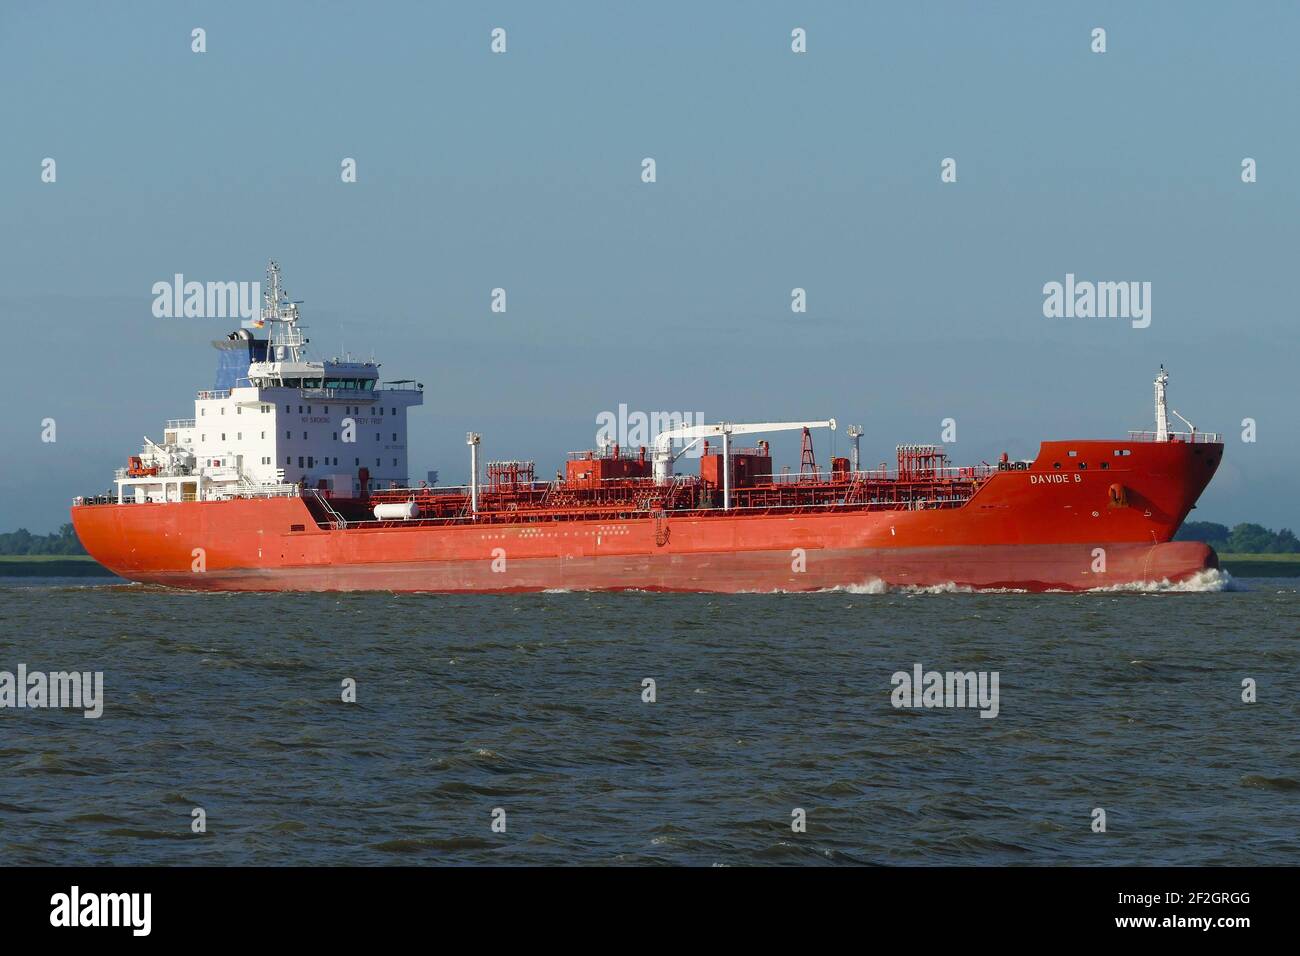 Germany. 26th June, 2017. The chemical tanker DAVIDE B. taken on the Elbe. According to the shipping company, the Dutch tanker sailing under the flag of Malta was attacked by pirates in the Gulf of Guinea in West Africa. Fifteen crew members were kidnapped, according to a spokesman for the shipping company in Barendrecht near Rotterdam on Friday. Six other seafarers were safe on the ship and unharmed, he said. So far, there has been no contact with the kidnappers. Credit: Hasenpusch/dpa/Alamy Live News Stock Photo